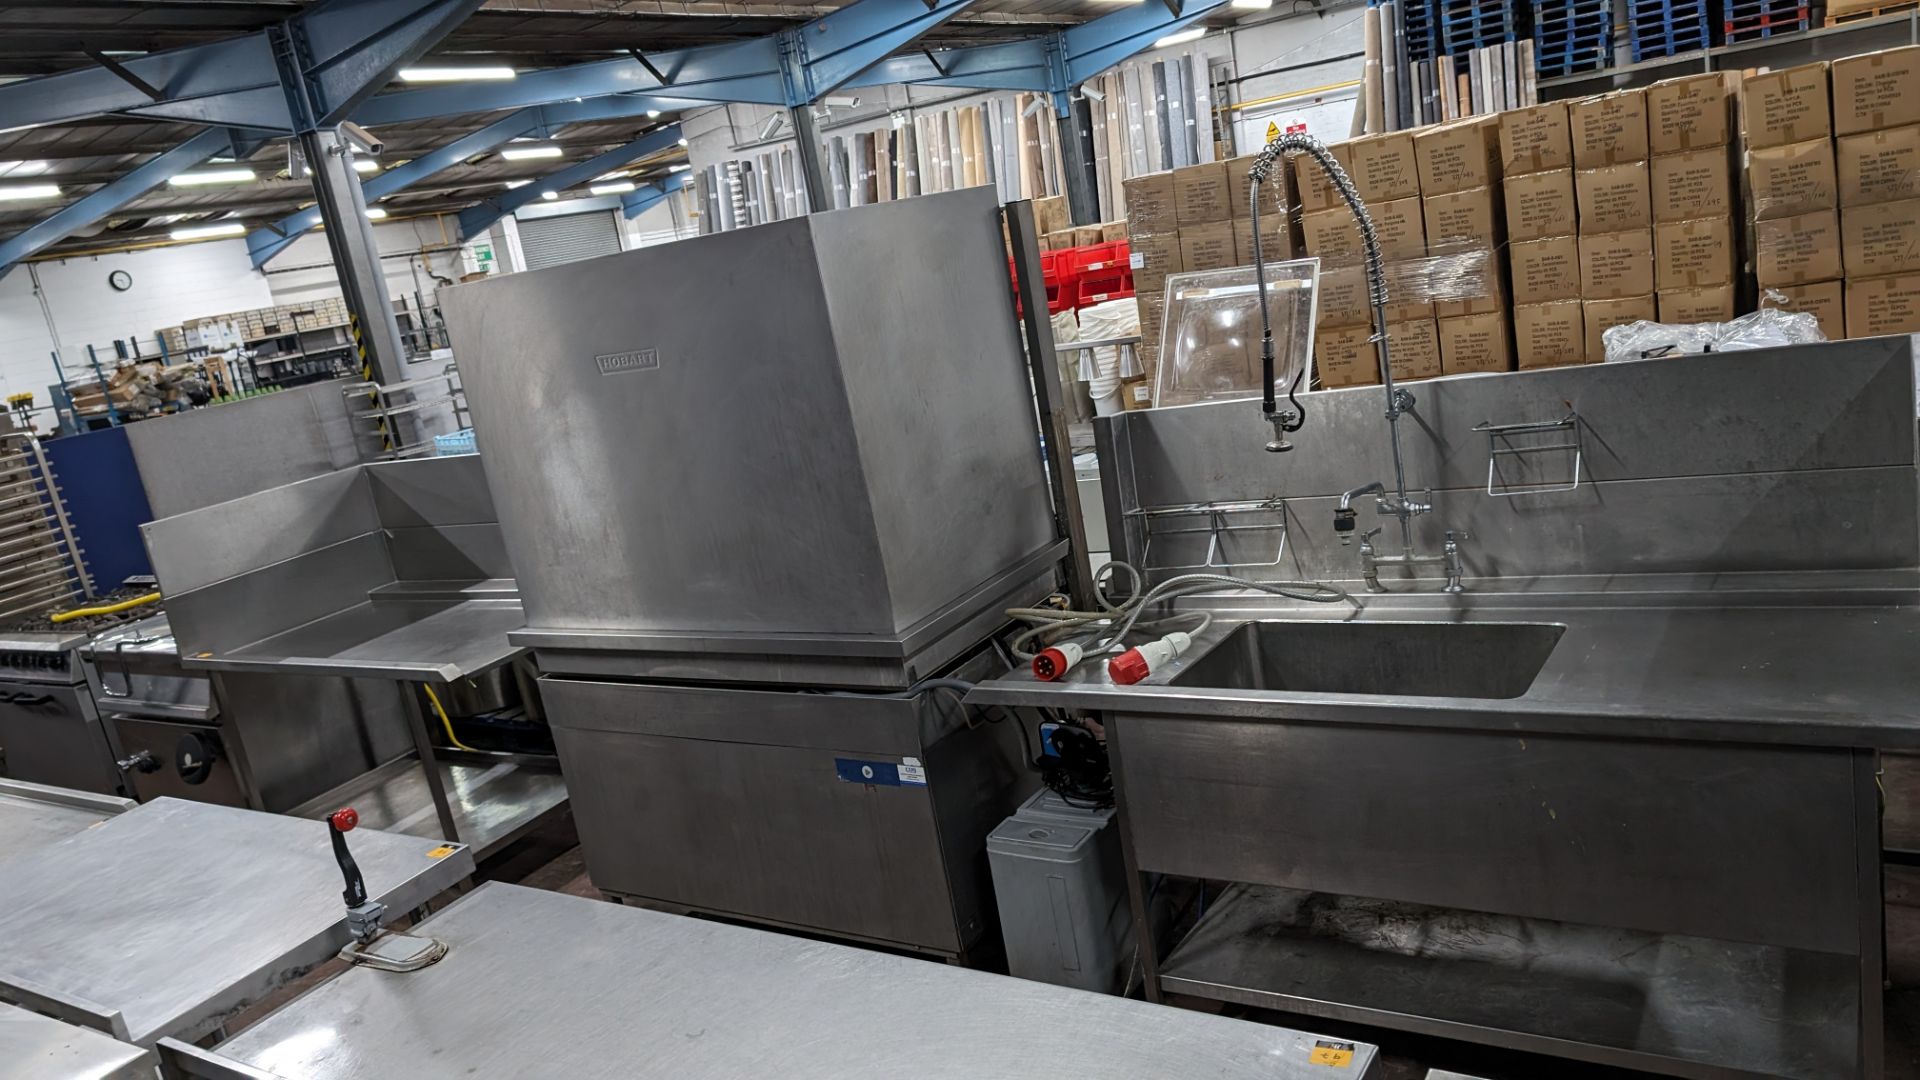 Hobart very large heavy duty commercial pass-through dishwasher including large stainless steel tray - Image 18 of 19